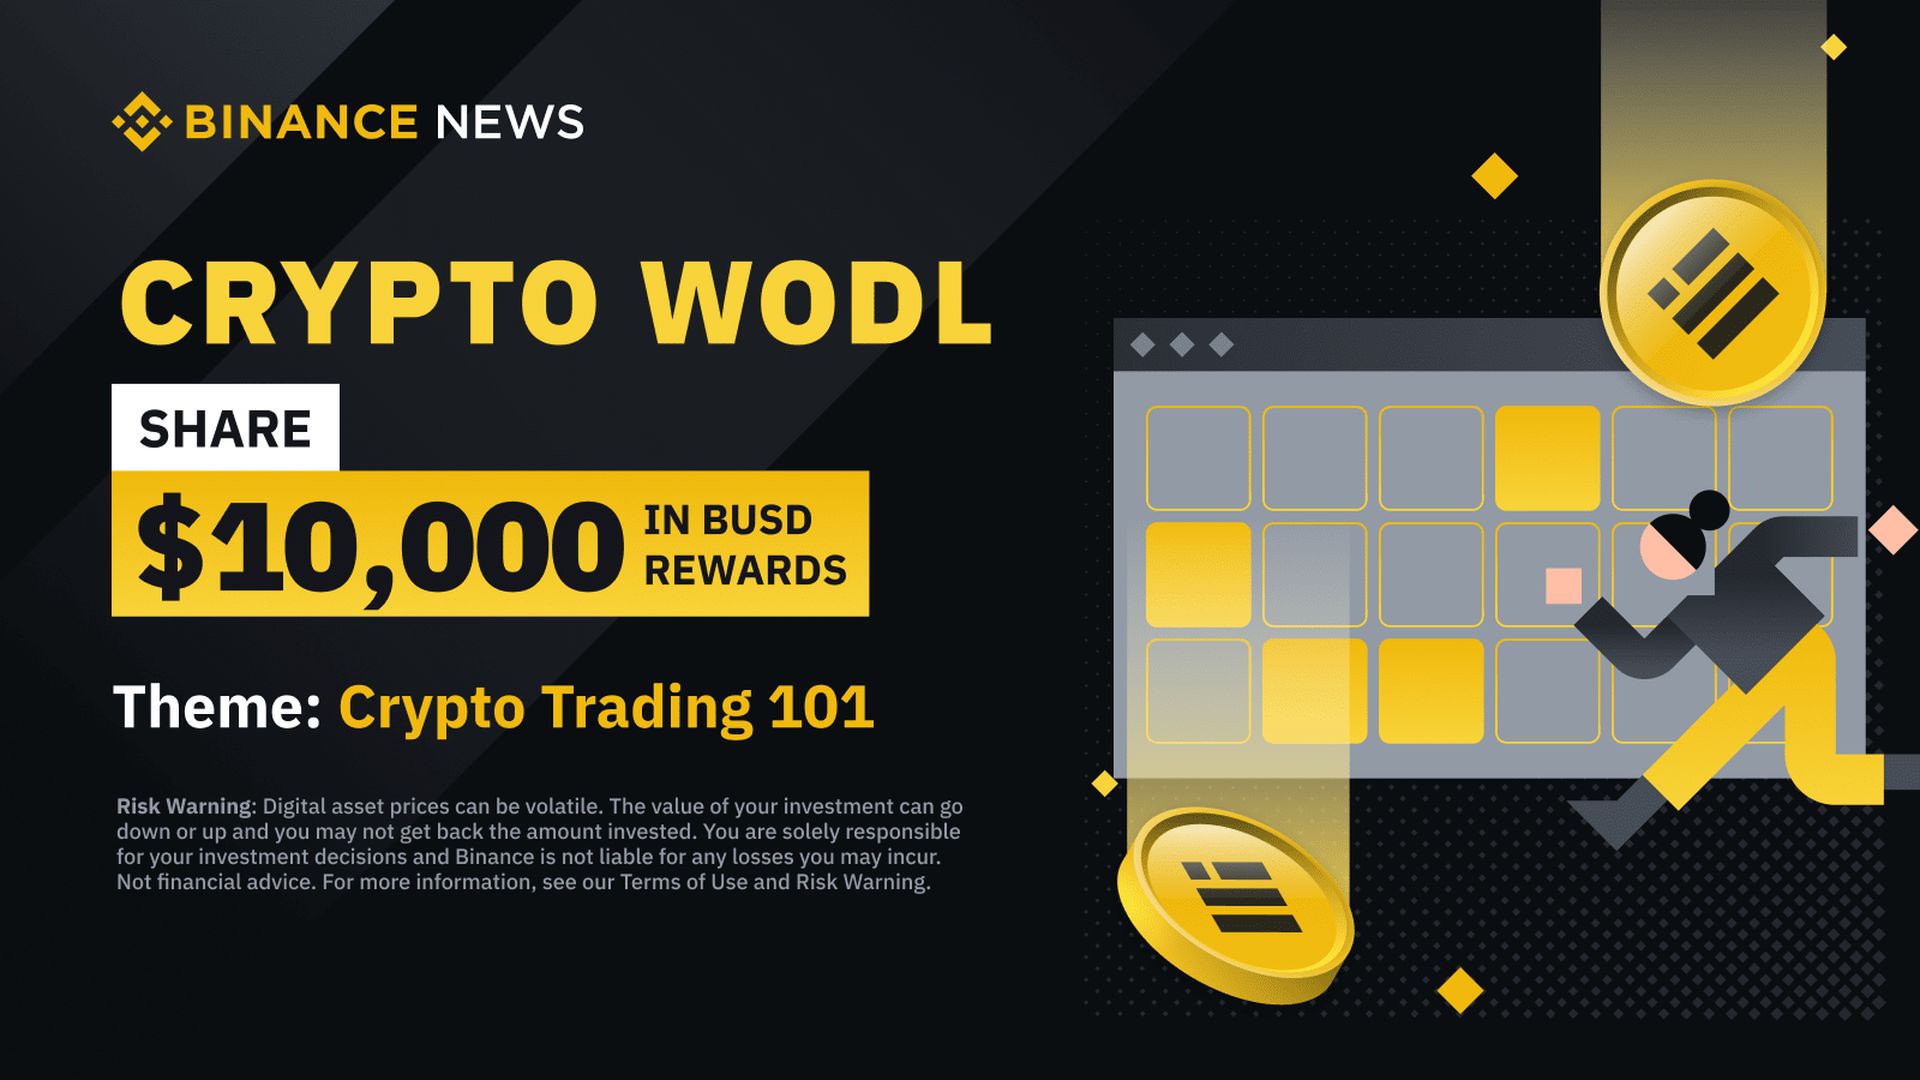 The popular crypto exchange is hosting its Binance Crypto WODL event, and here we'll give you the answers so you can get your share of $10,000 in BUSD.